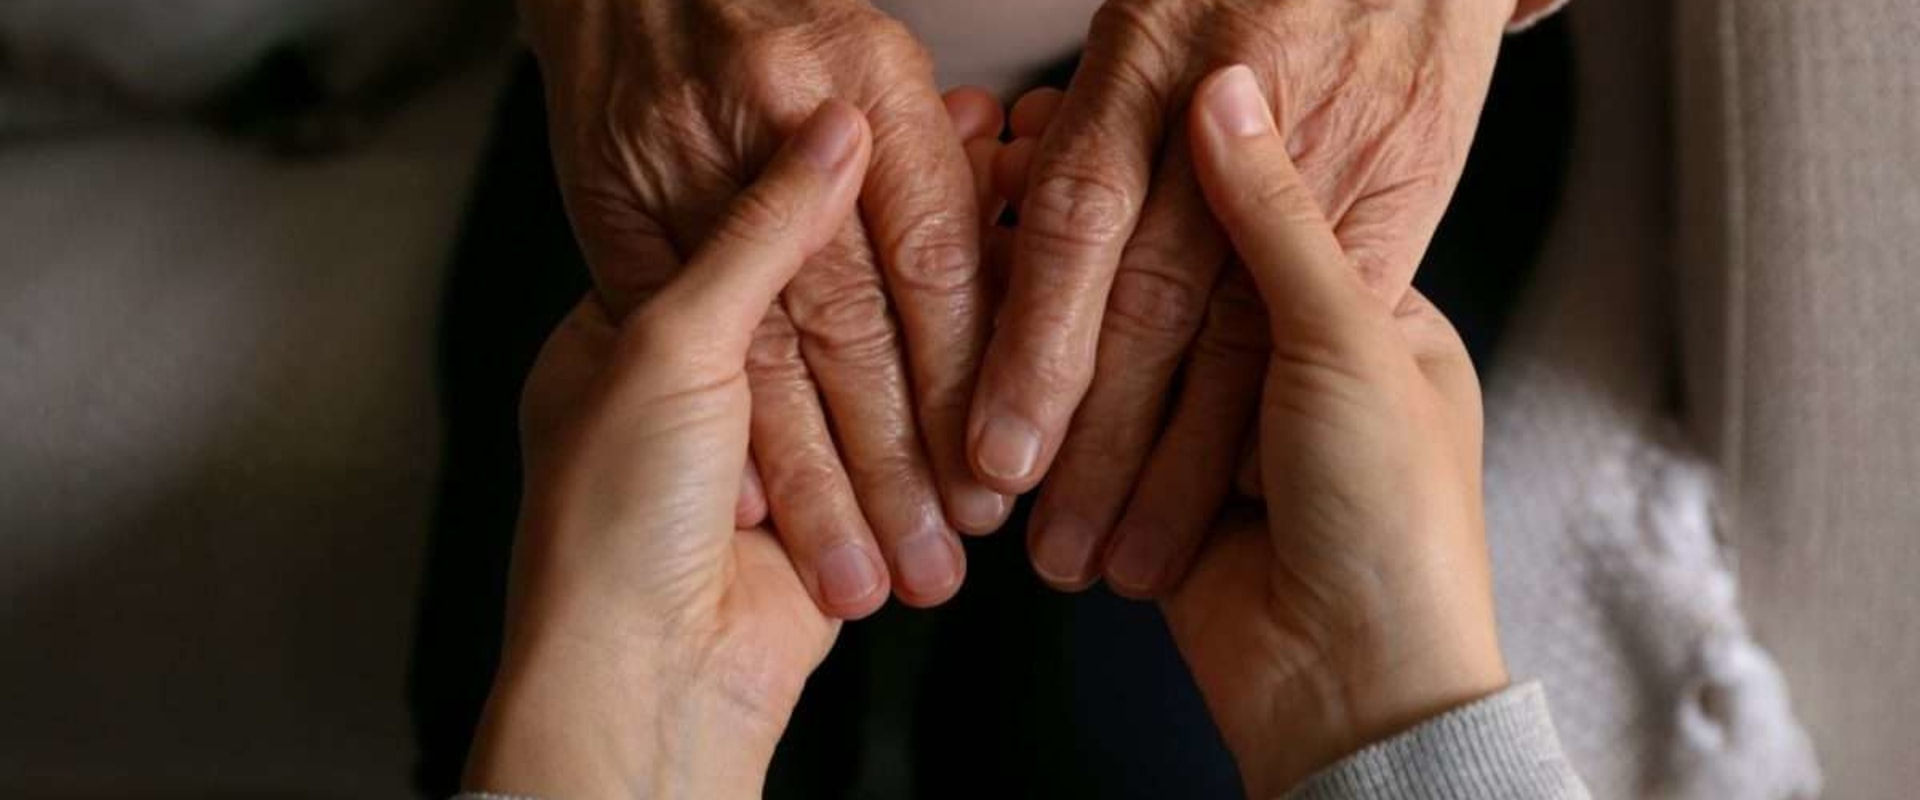 What are the 4 type of caregivers?